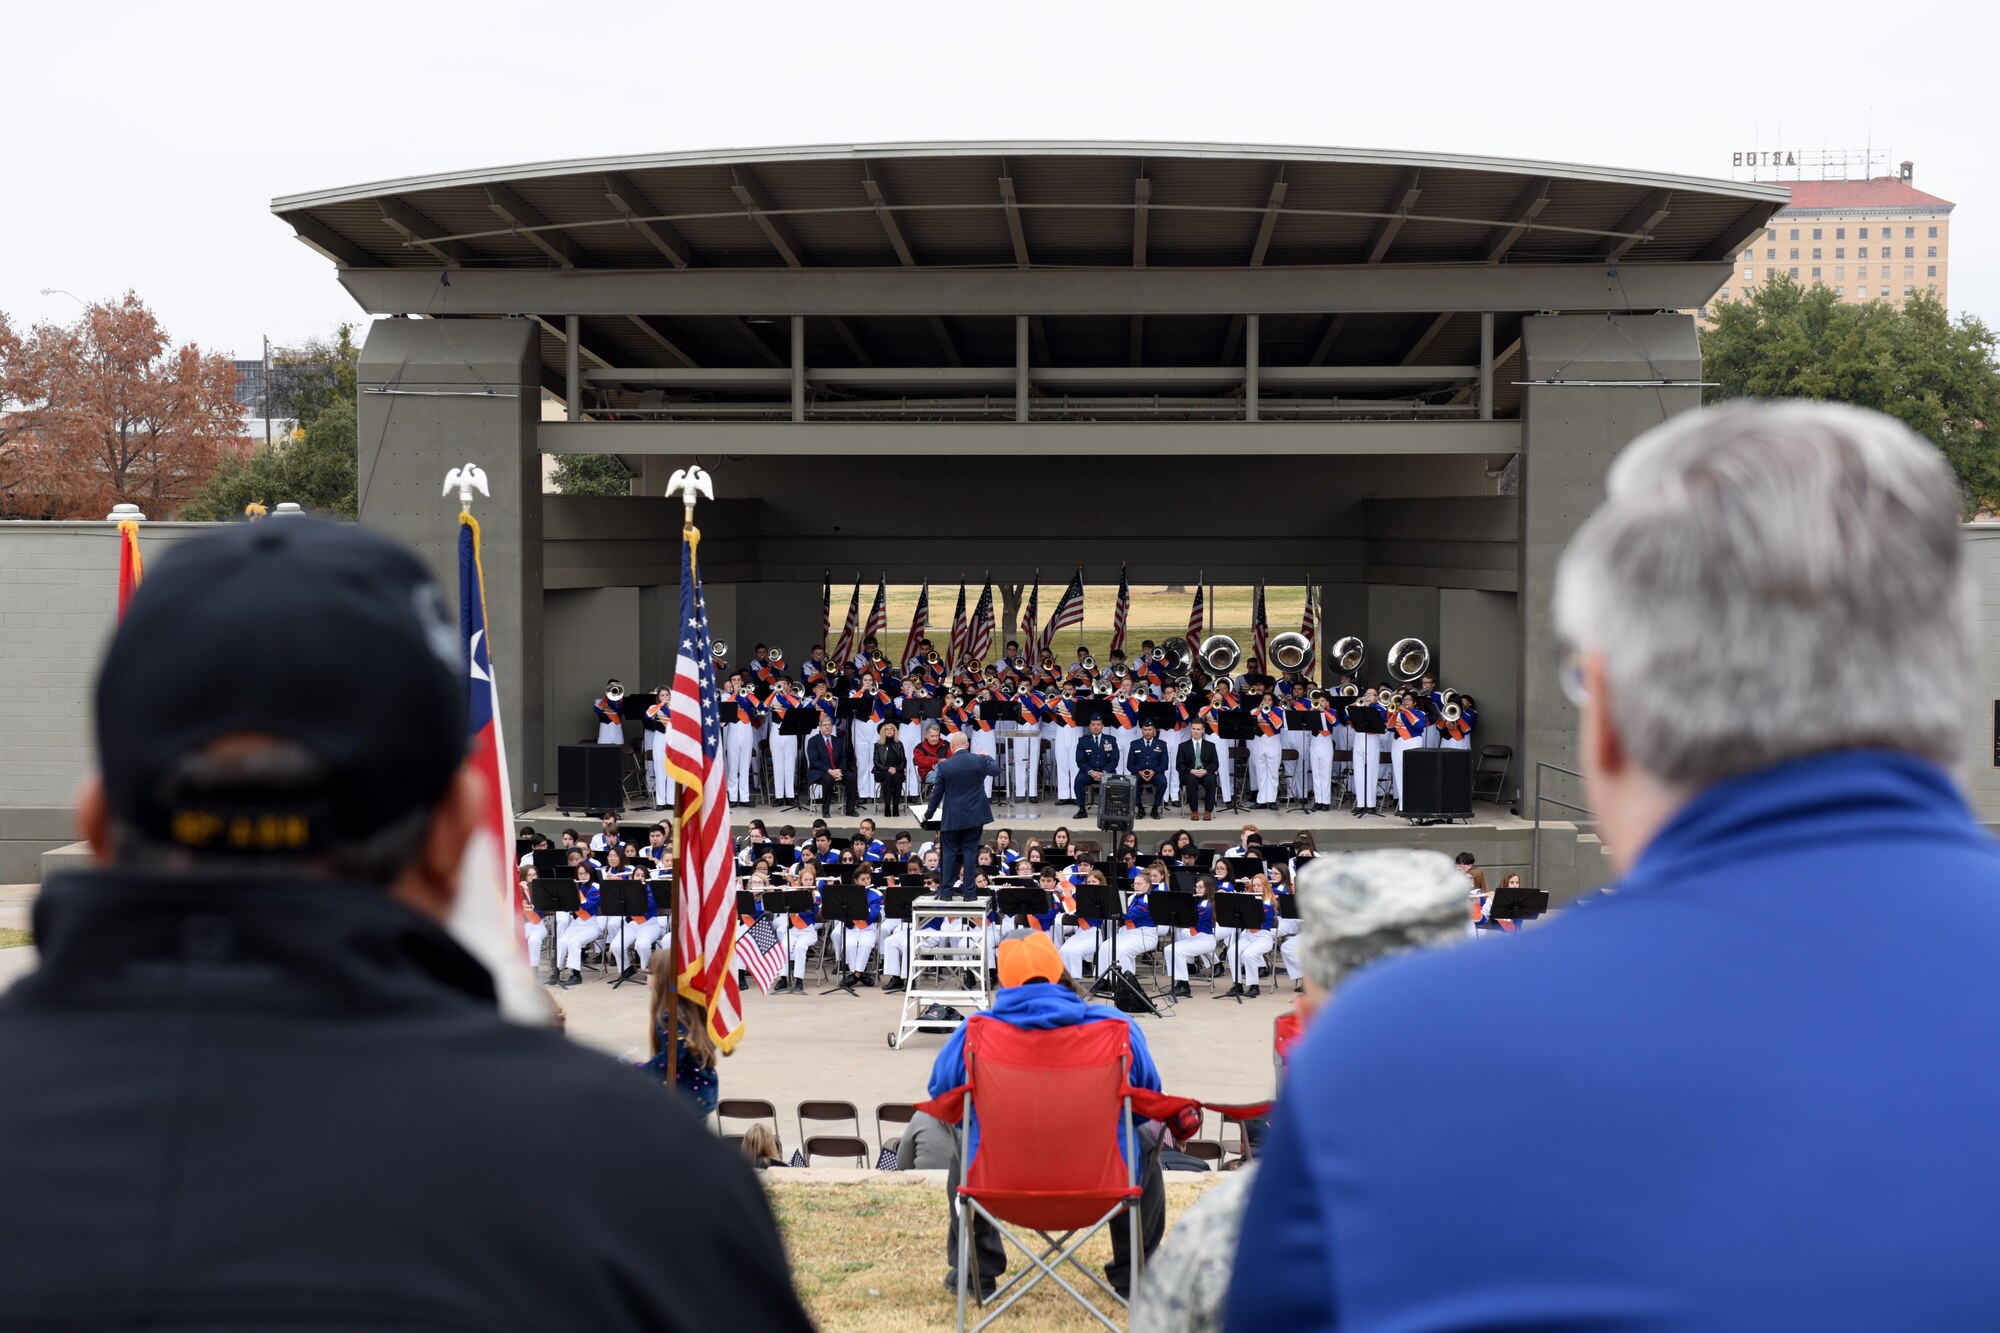 Spectators watch the Central High School Band during the Hero’s Hunt Honor Concert at the Bill Aylor Sr. Memorial RiverStage in San Angelo, Texas, Dec. 6, 2018. The Hero’s Hunt Honor Concert honors wounded veterans with speeches from local leaders, music by the Central High School Band and recognition from members of San Angelo. (U.S. Air Force photo by Senior Airman Randall Moose/Released)